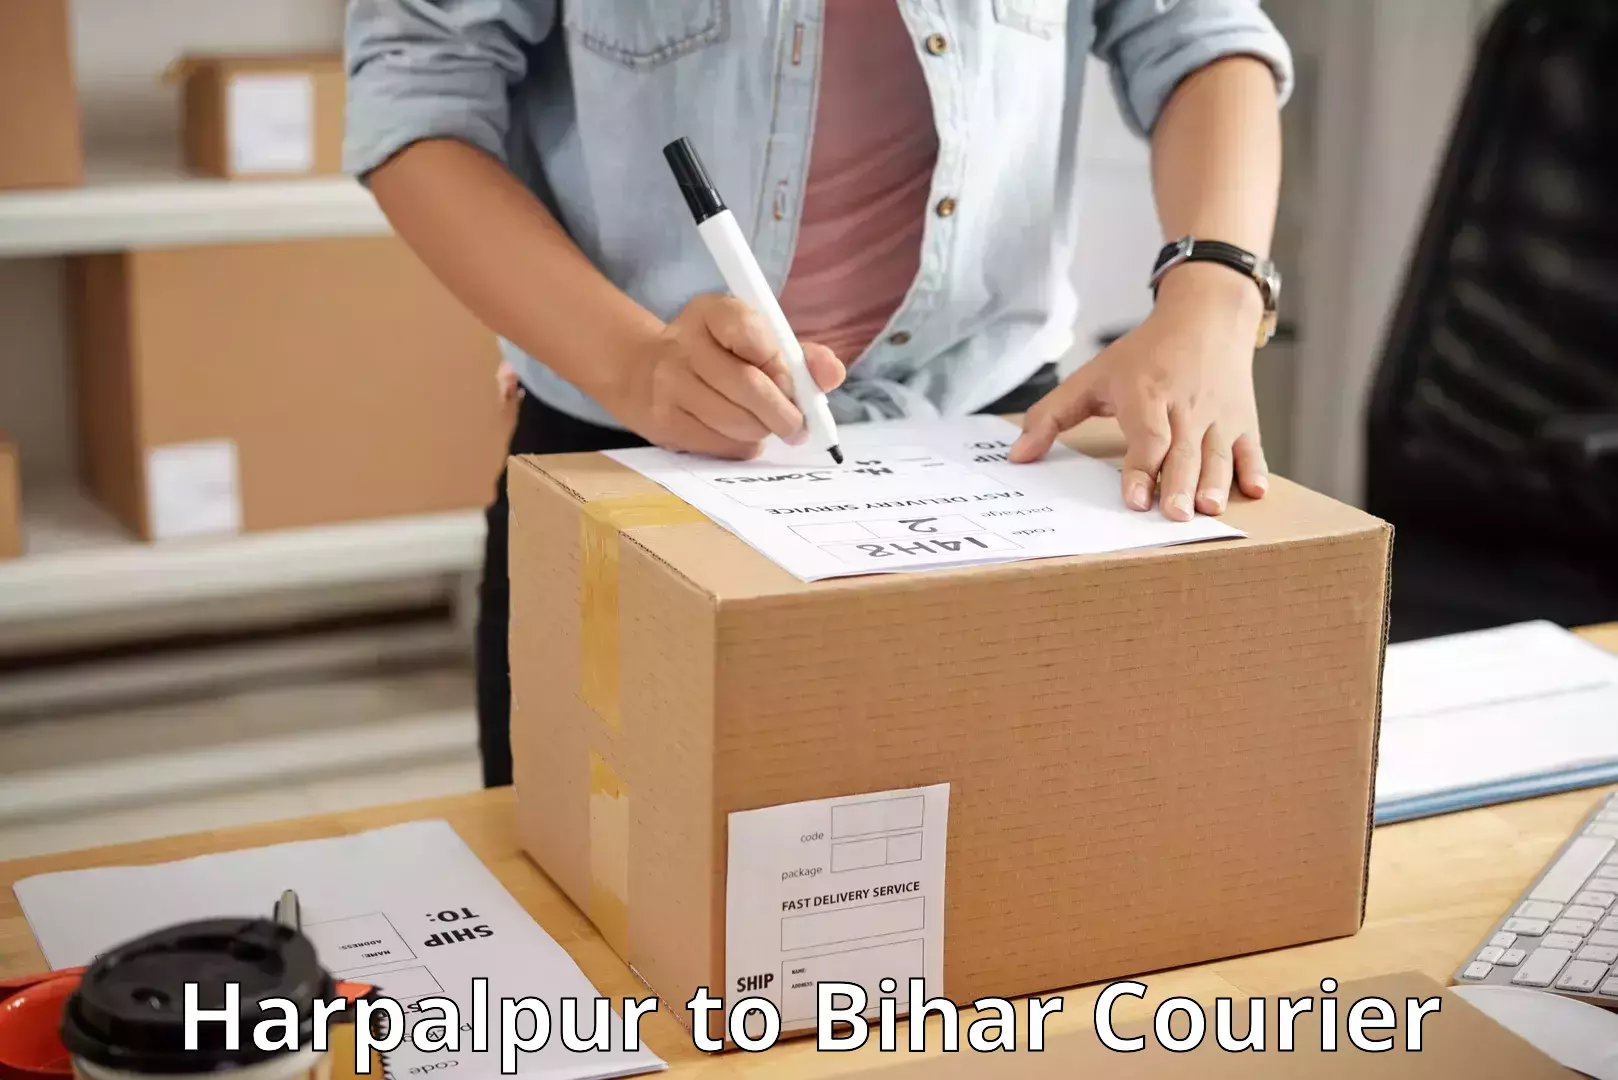 24-hour courier service Harpalpur to Patna